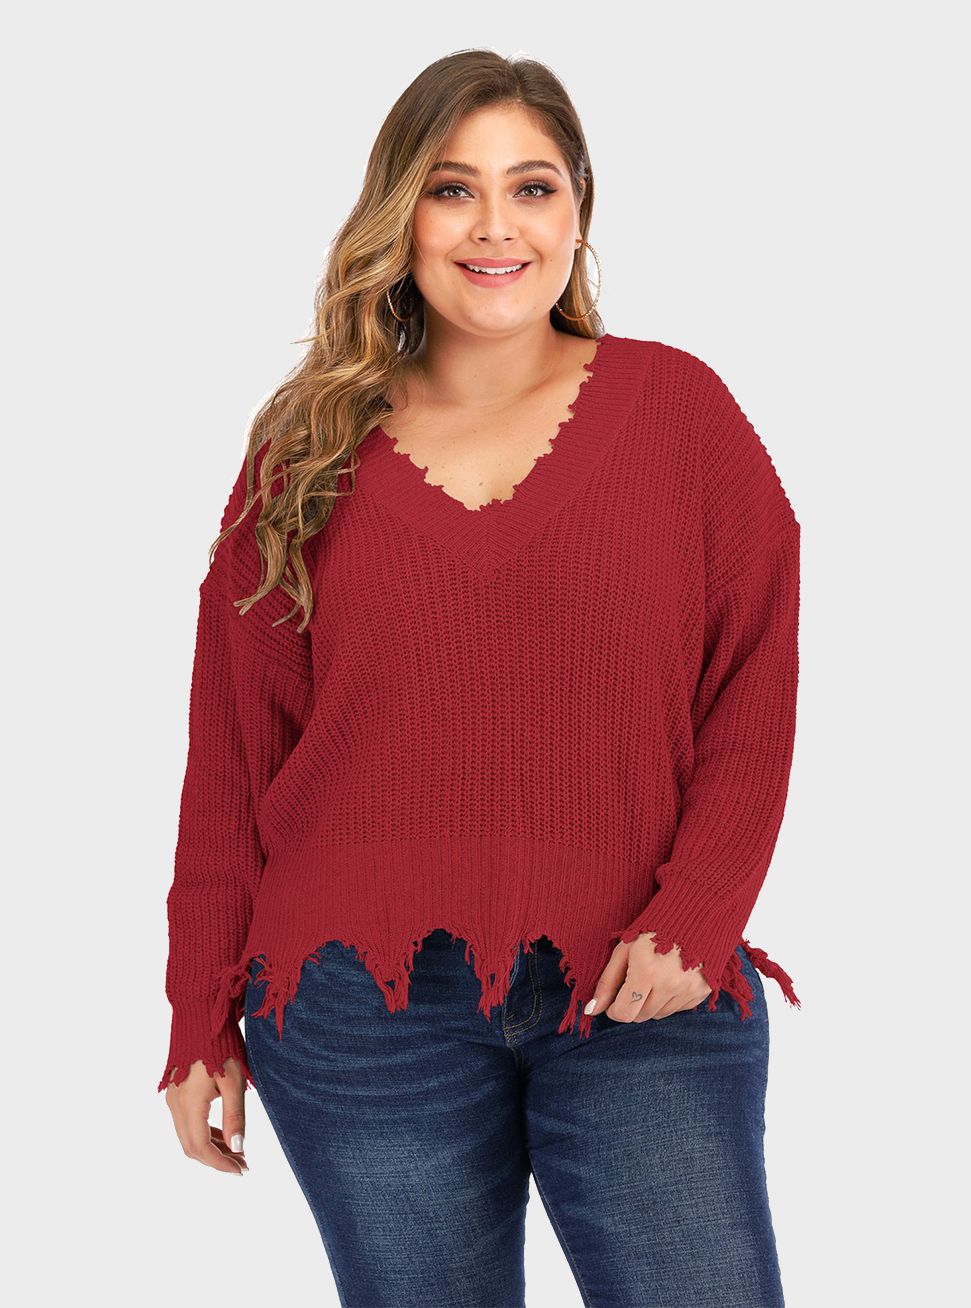 Plus Size V-neck Knitted Sweater DMladies